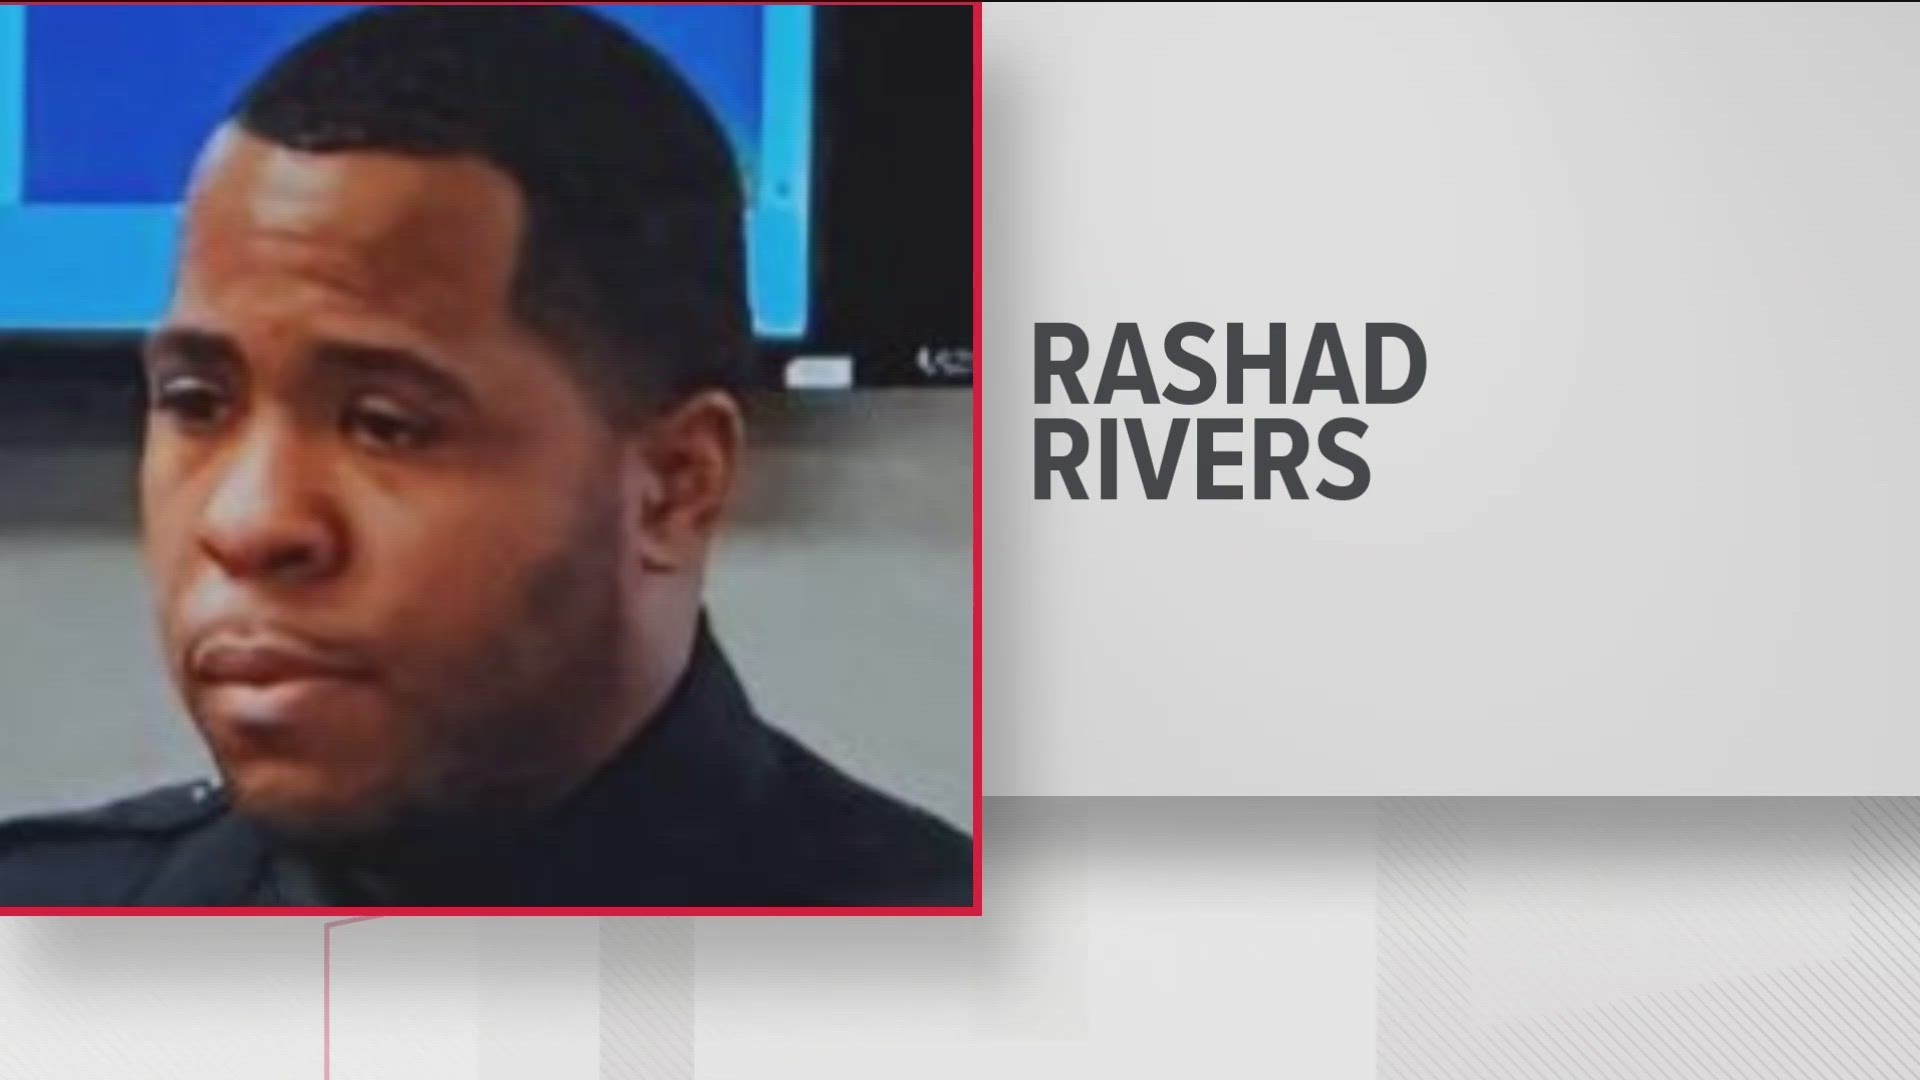 Officer Rashad Rivers has been at Grady Hospital recovering. He went into surgery early Thursday to get his jaw fixed.